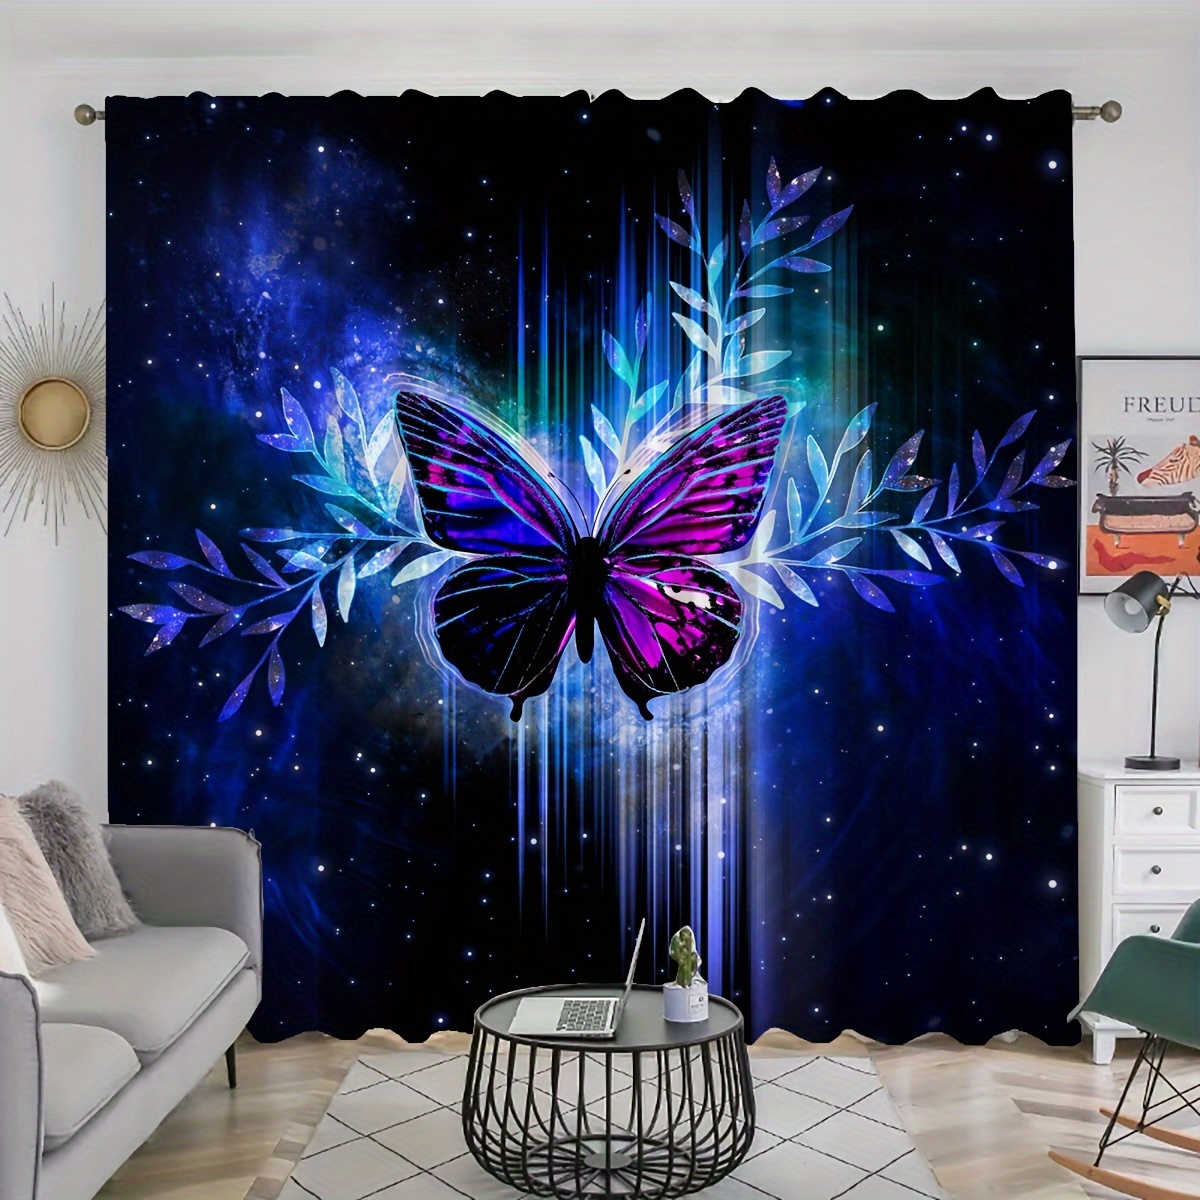 

2pcs, Space Blue Butterfly Printed Curtains, Rod Pocket Curtain Suitable For Restaurants, Public Places, Living Rooms, Bedrooms, Offices, Study Rooms, Home Decoration